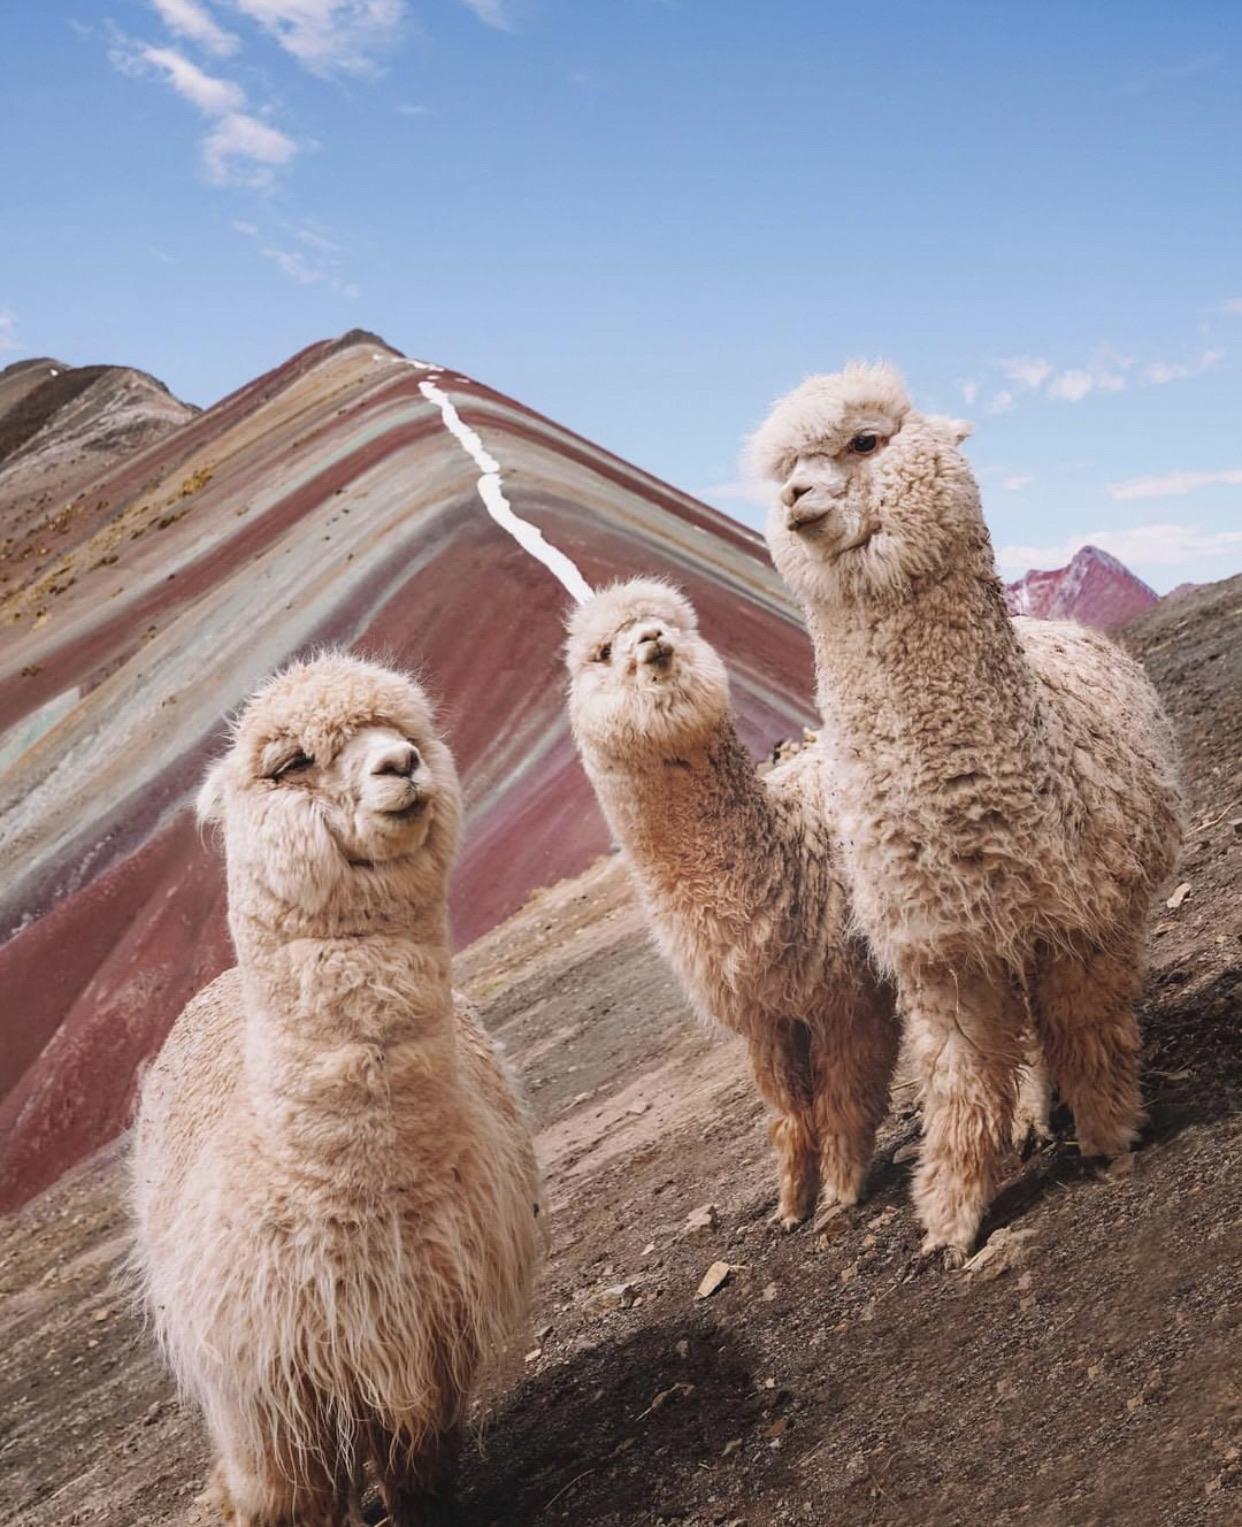 The Llama crew from Pperu.